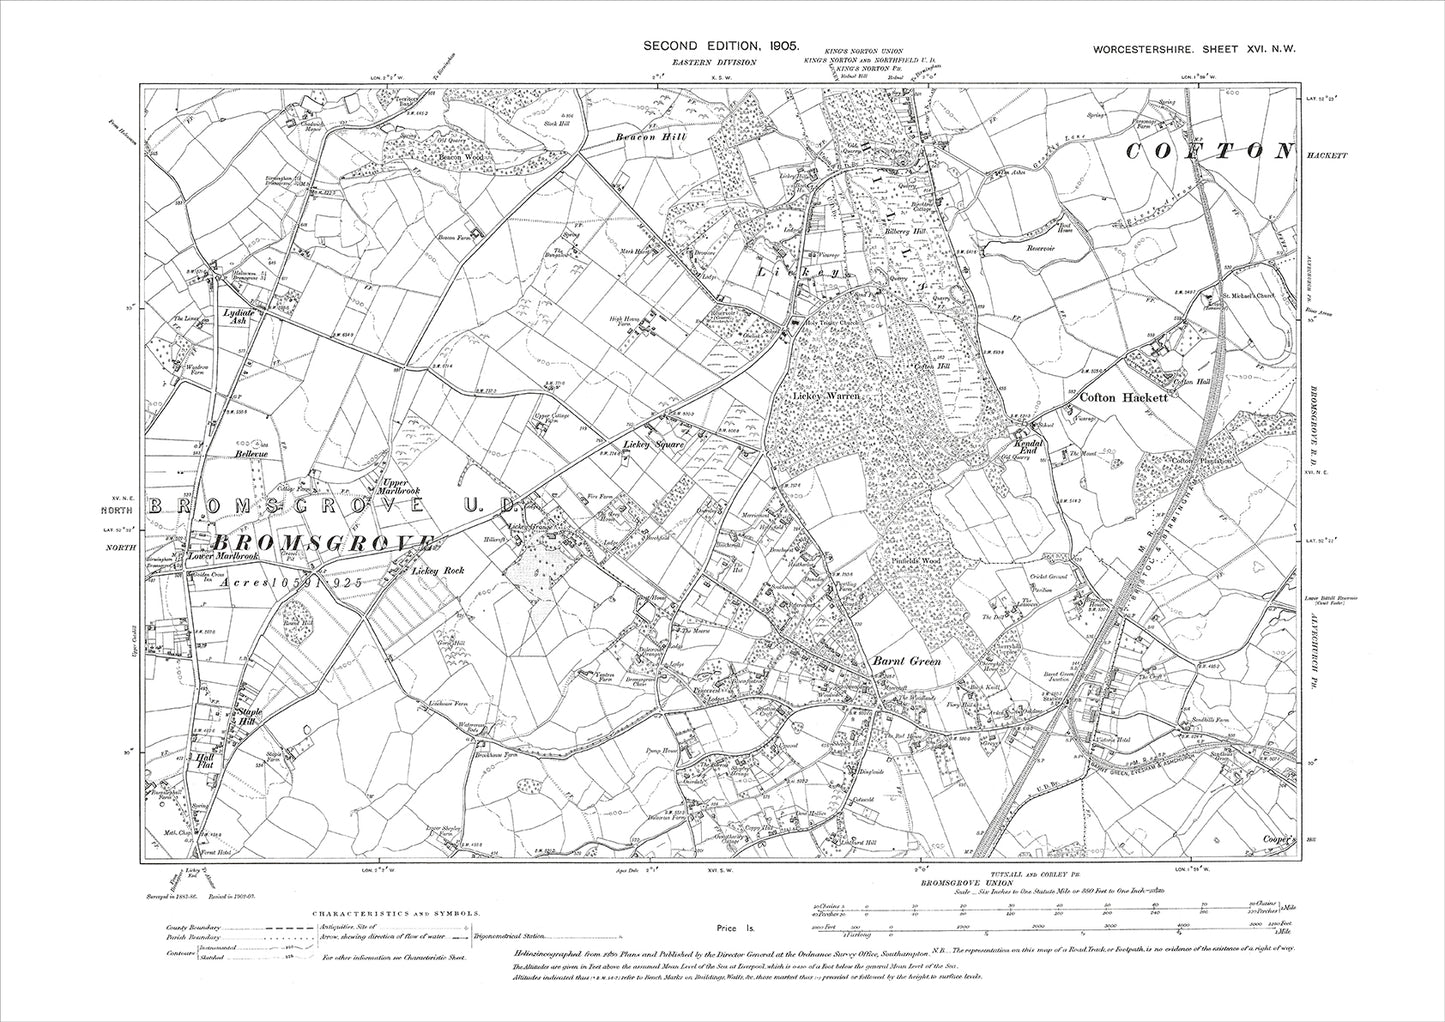 Cofton Hackett, Lickey, Barnt Green, Lower Marlbrook, old map Worcestershire 1905: 16NW